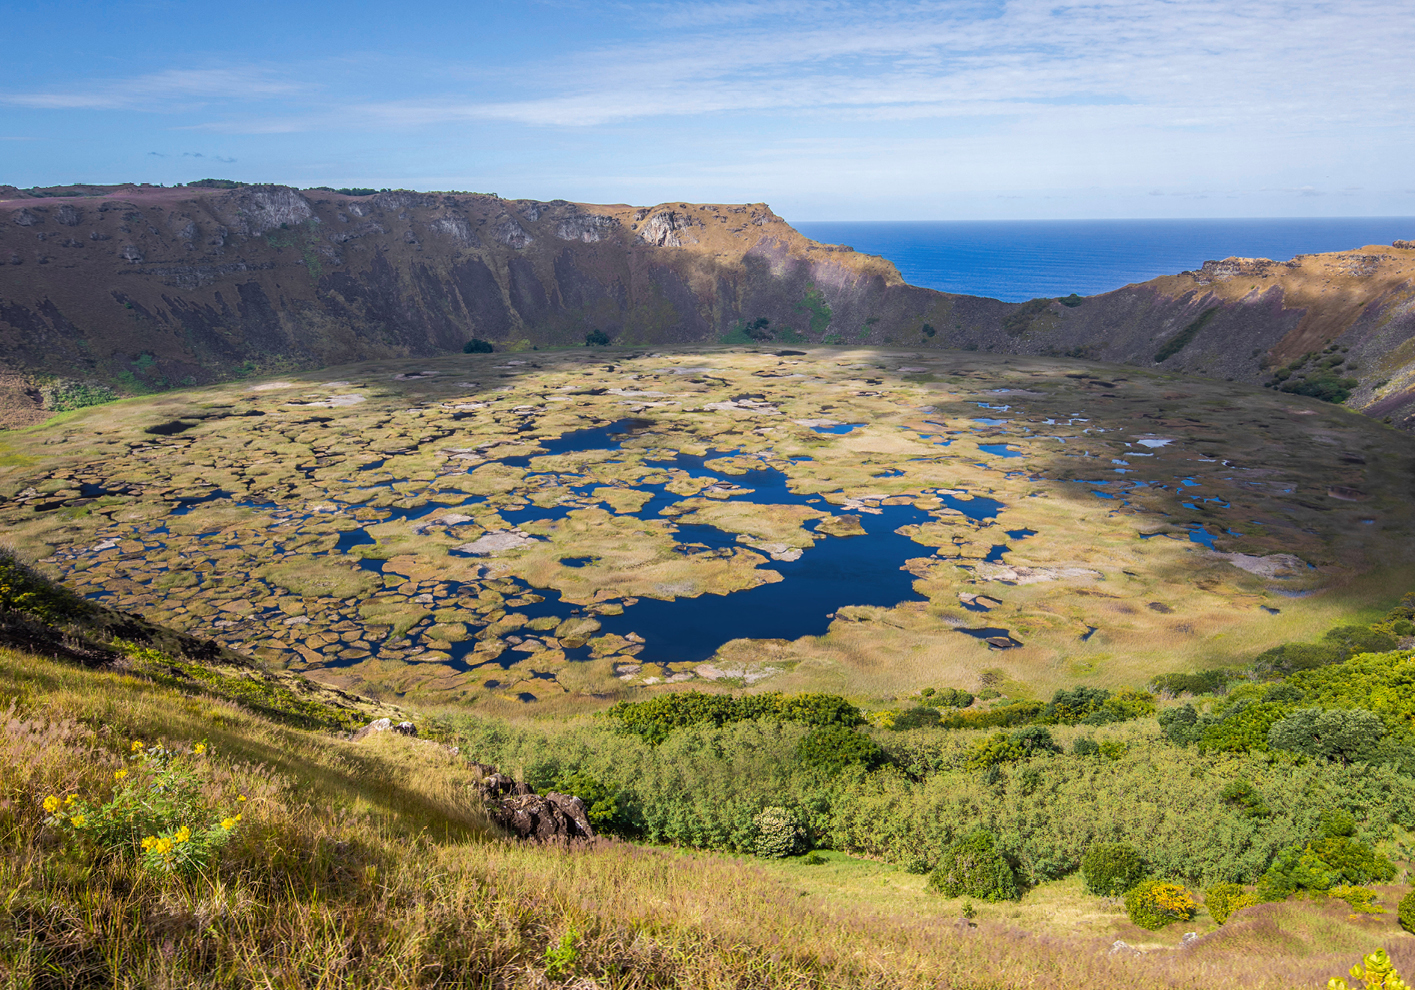 The view out over the Rano Kau volcano